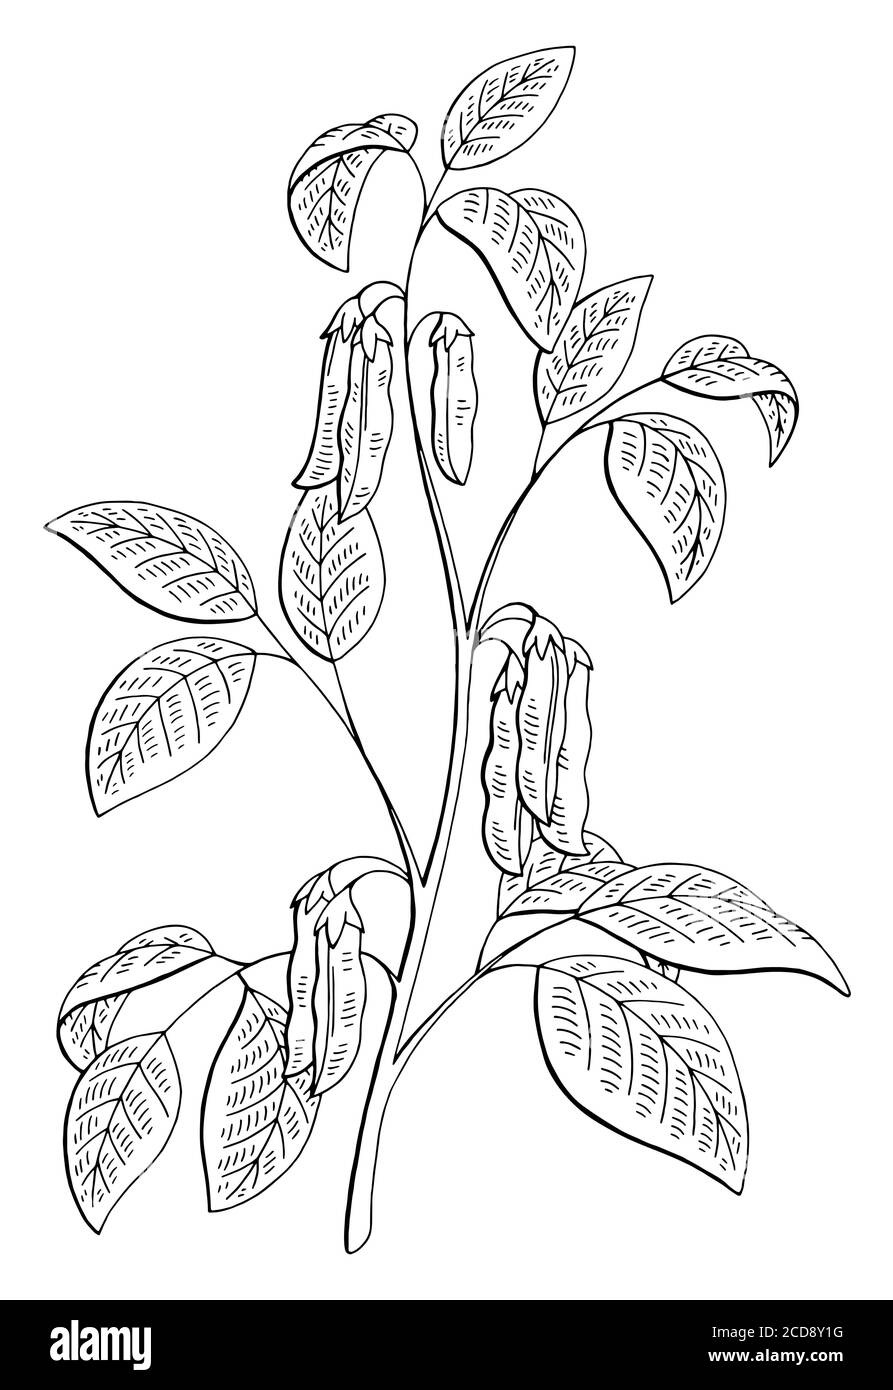 Soybean plant graphic black white isolated sketch illustration vector Stock Vector